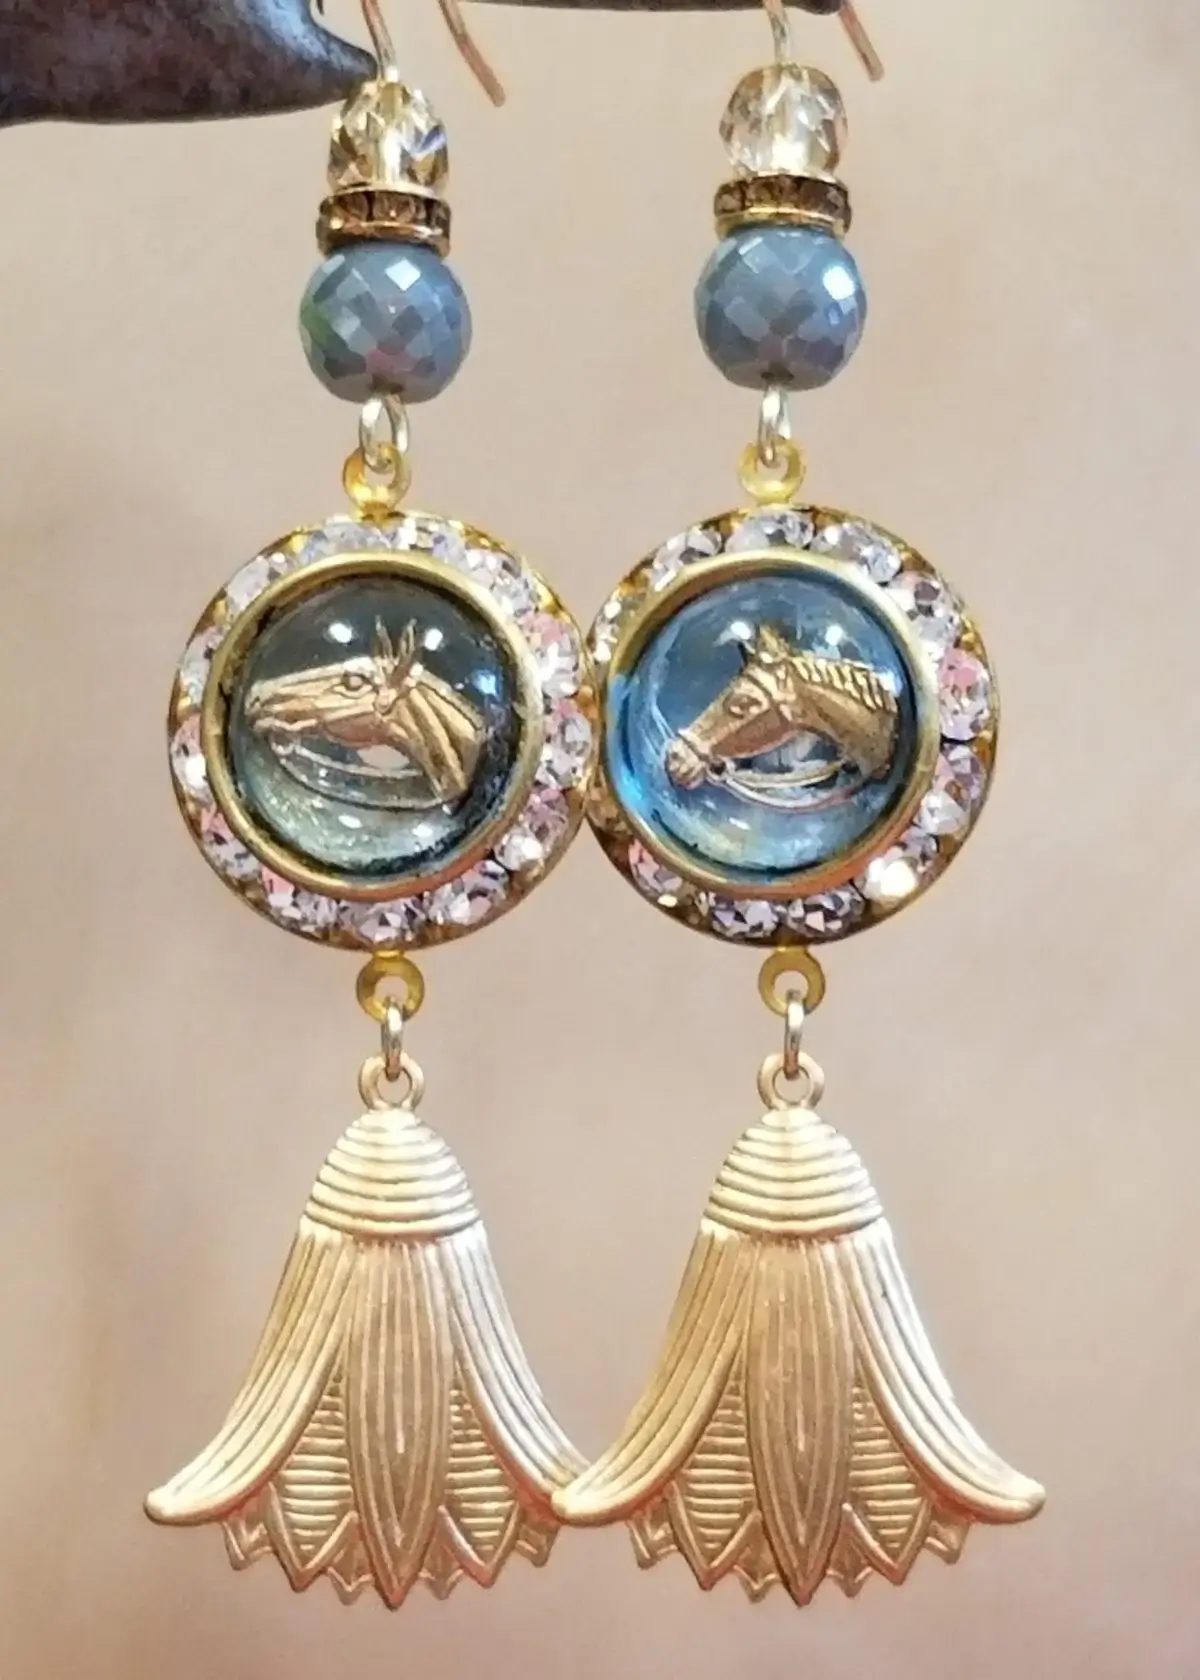 What materials are commonly Used to Make Cowgirl Earrings?